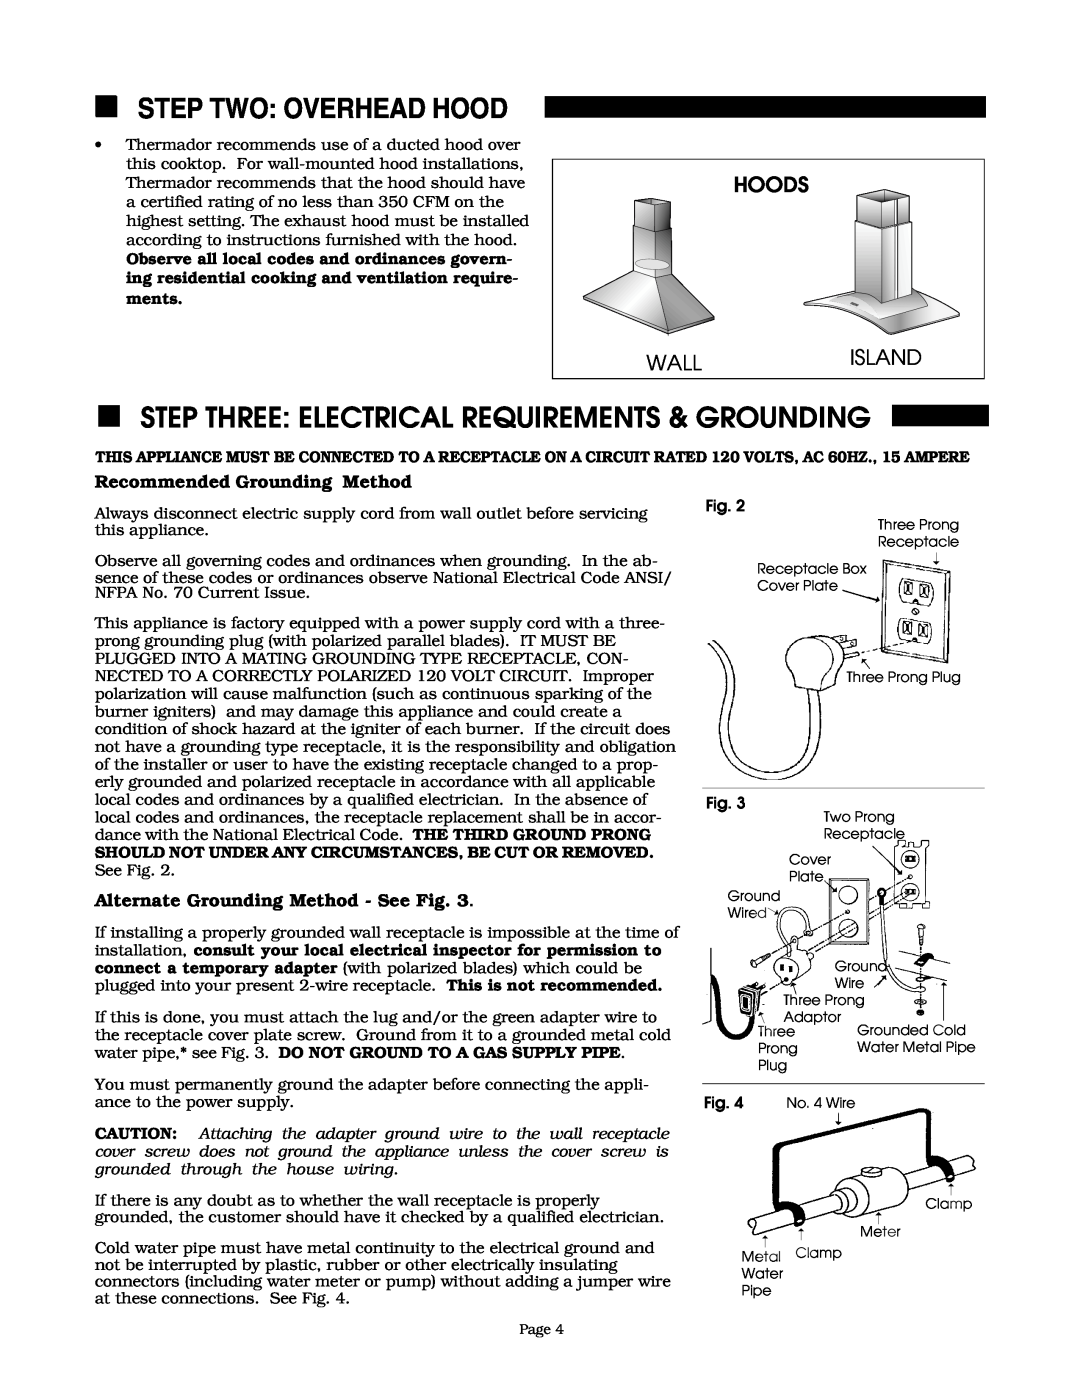 Thermador GGS36, SGS36G, SGS30 Step Two Overhead Hood, Step Three Electrical Requirements & Grounding, Hoods, Wall, Island 